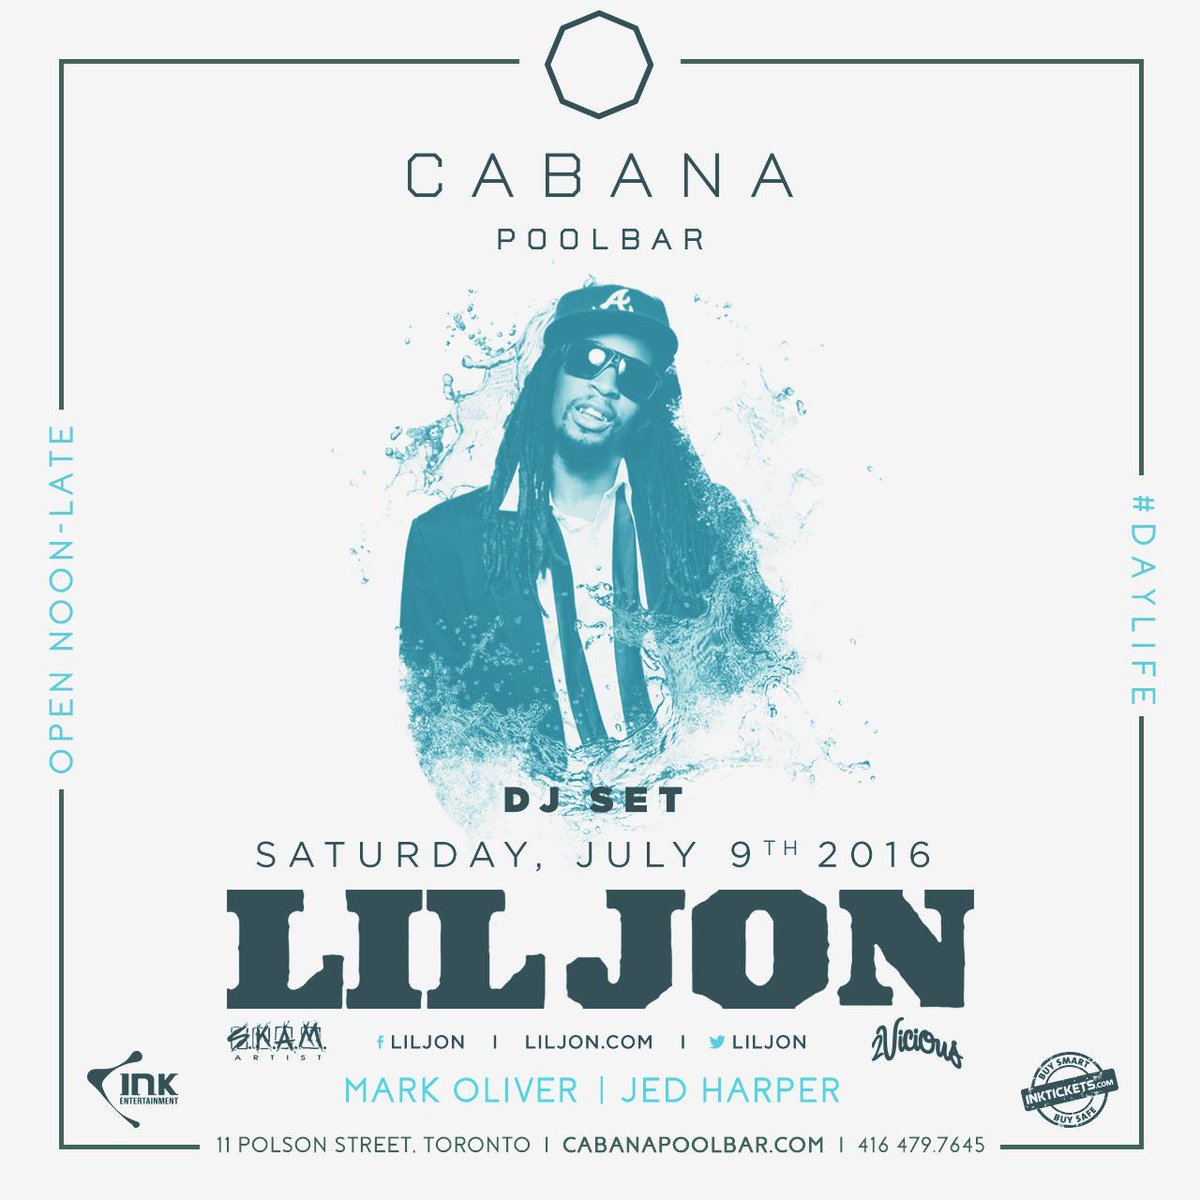 RT @CabanaPoolBar: Who's ready for another crazy weekend?! We have B2B parties w/ @LilJon & @SteveAngello this Saturday & Sunday. ????????✨ https…